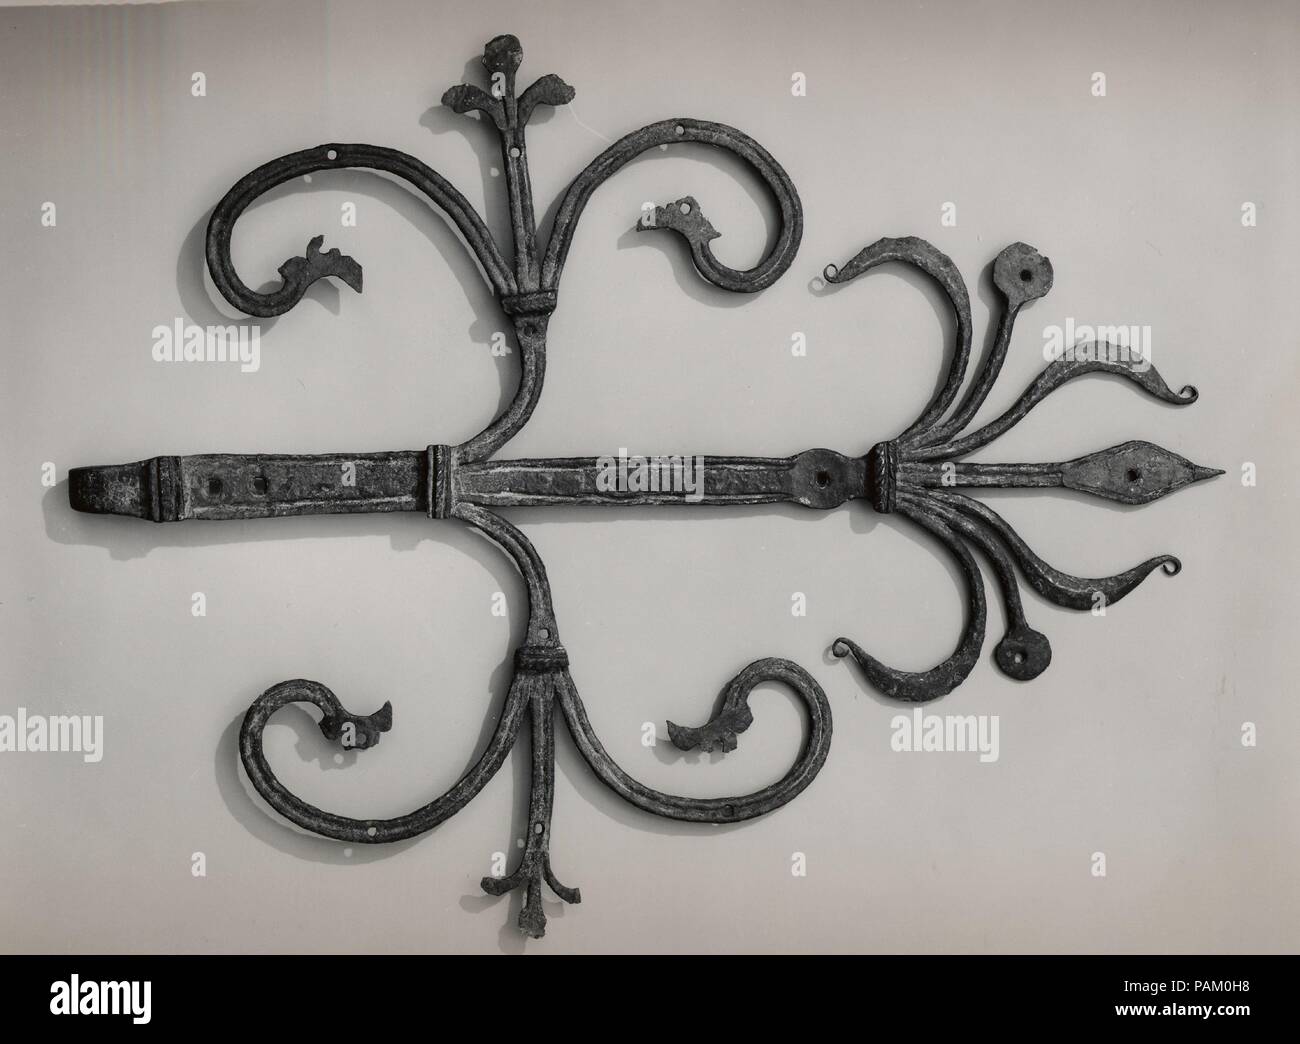 Hinge. Culture: European. Dimensions: Overall: 21 x 26 1/2 in. (53.3 x 67.3 cm). Date: 15th-16th Century. Museum: Metropolitan Museum of Art, New York, USA. Stock Photo